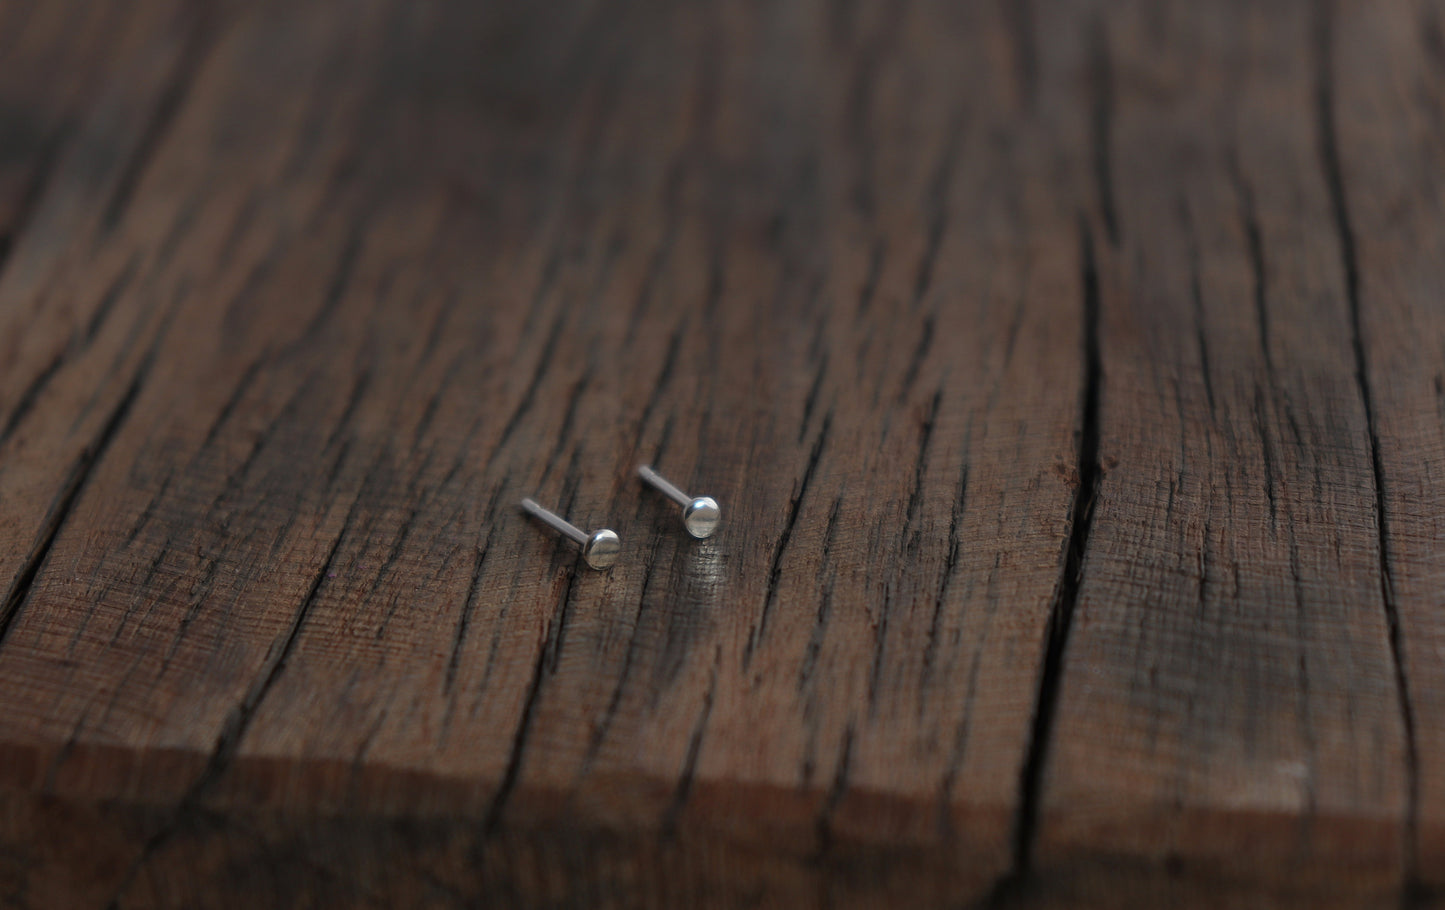 Tiny 3 mm Small Sterling Silver Disk Earrings